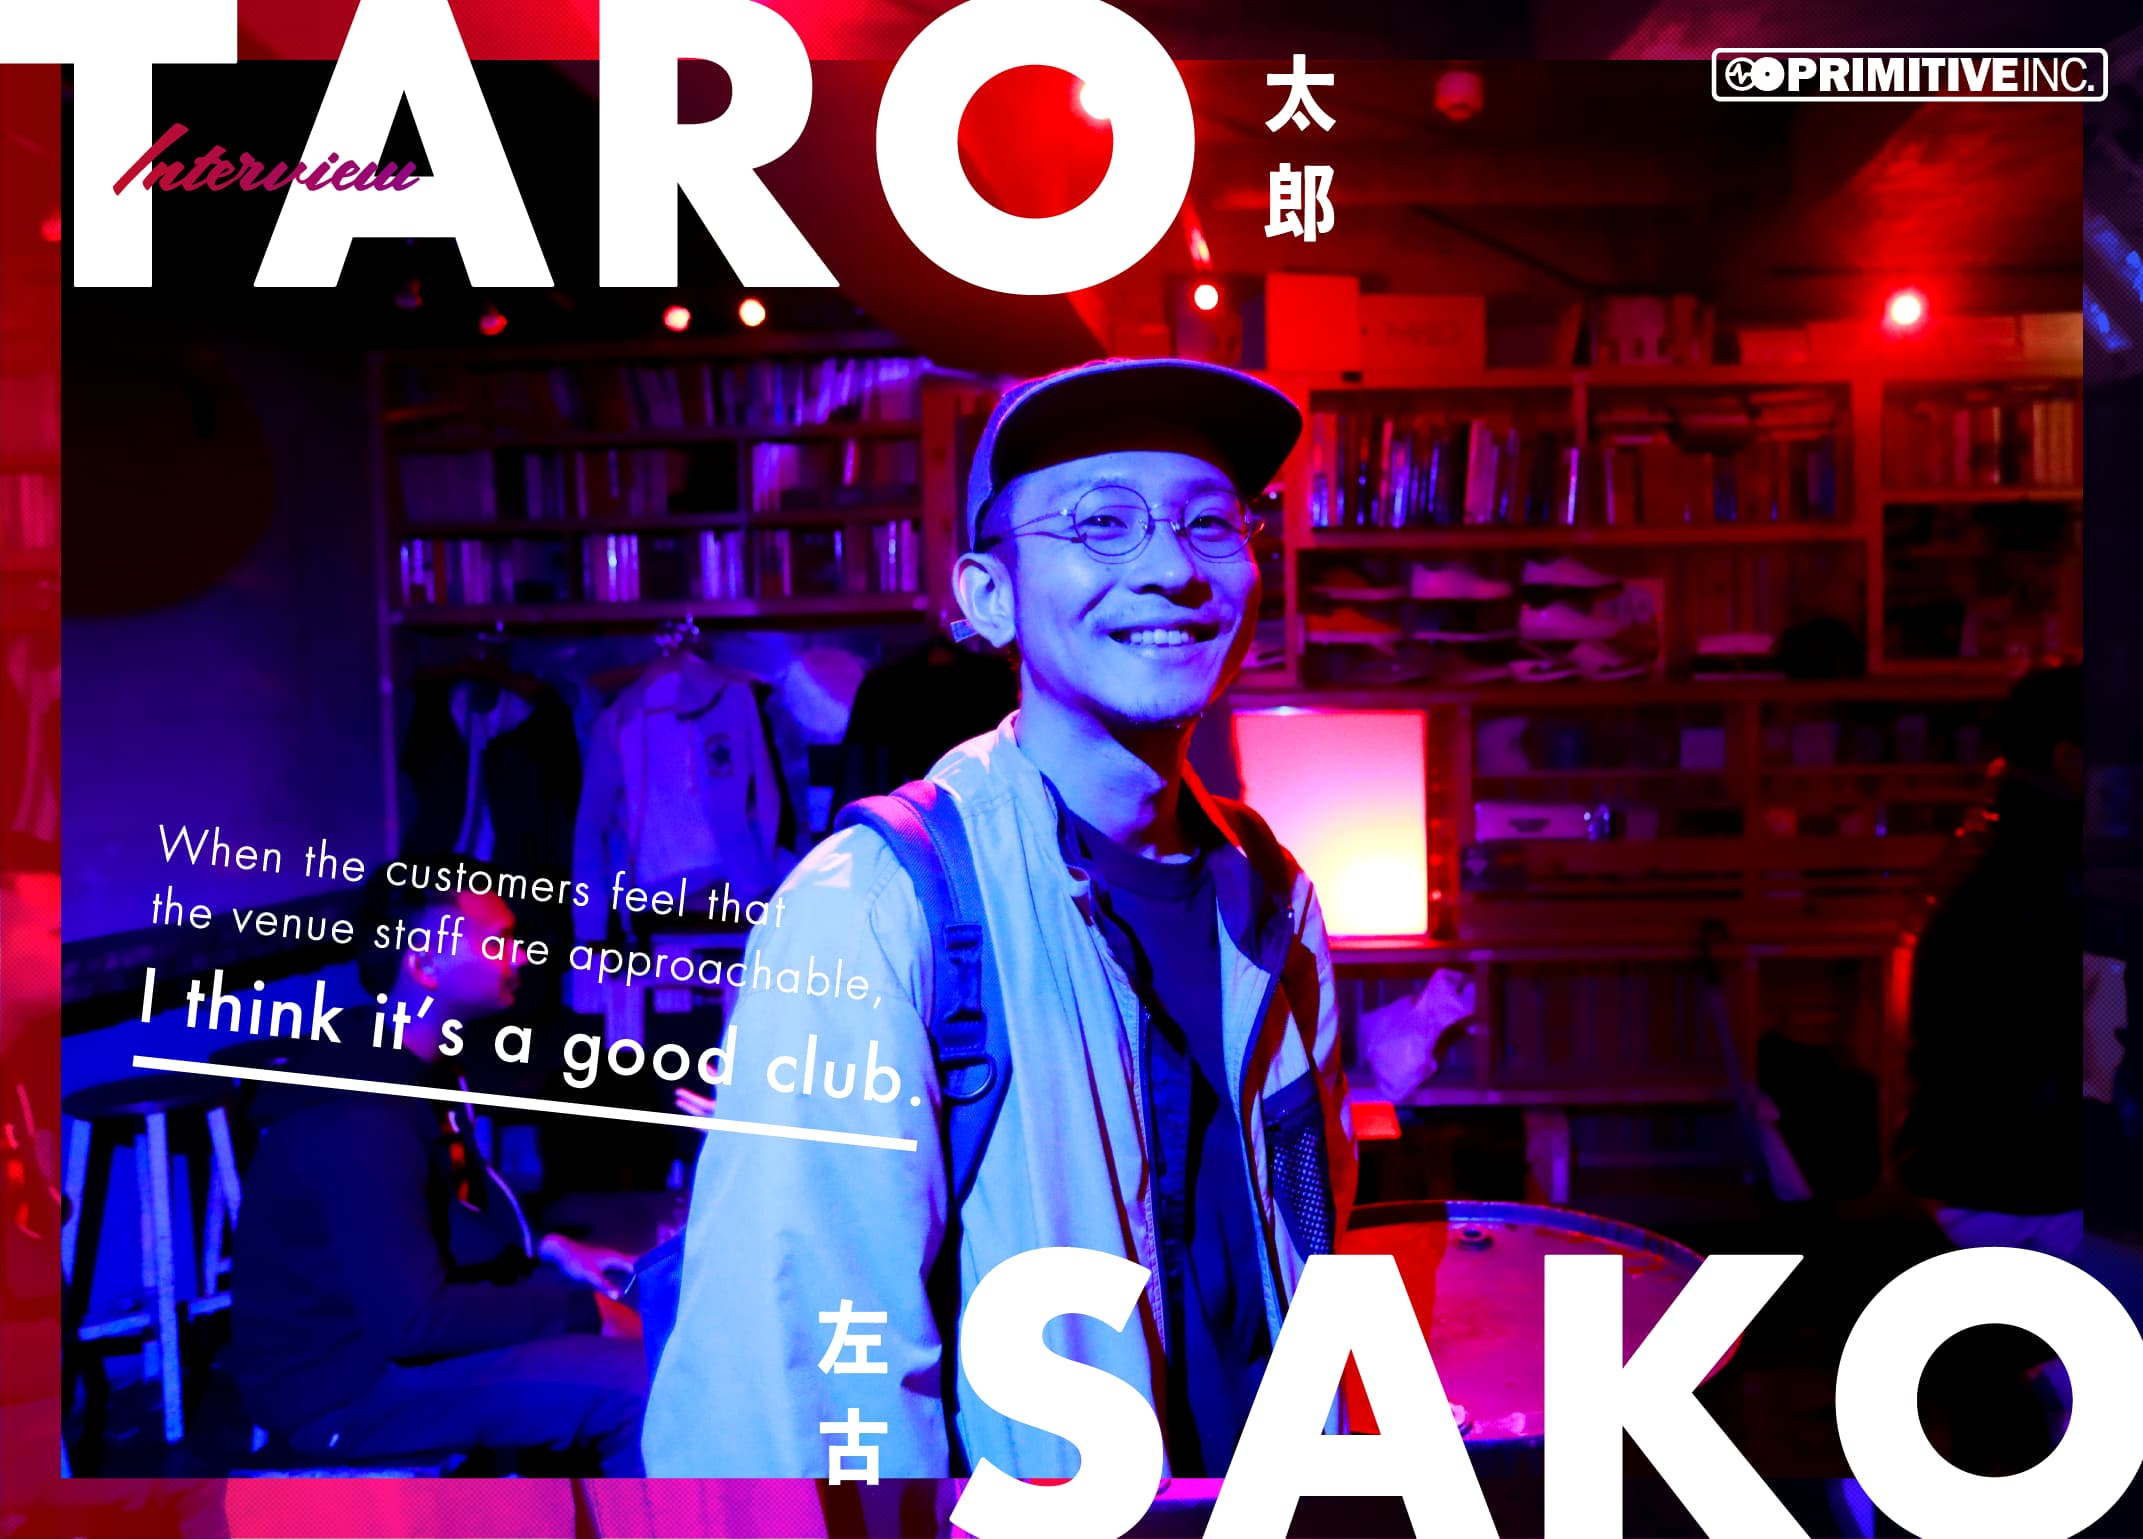 “When the customers feel that the venue staff are approachable, I think it’s a good club.” Taro Sako (PRIMITIVE INC.)